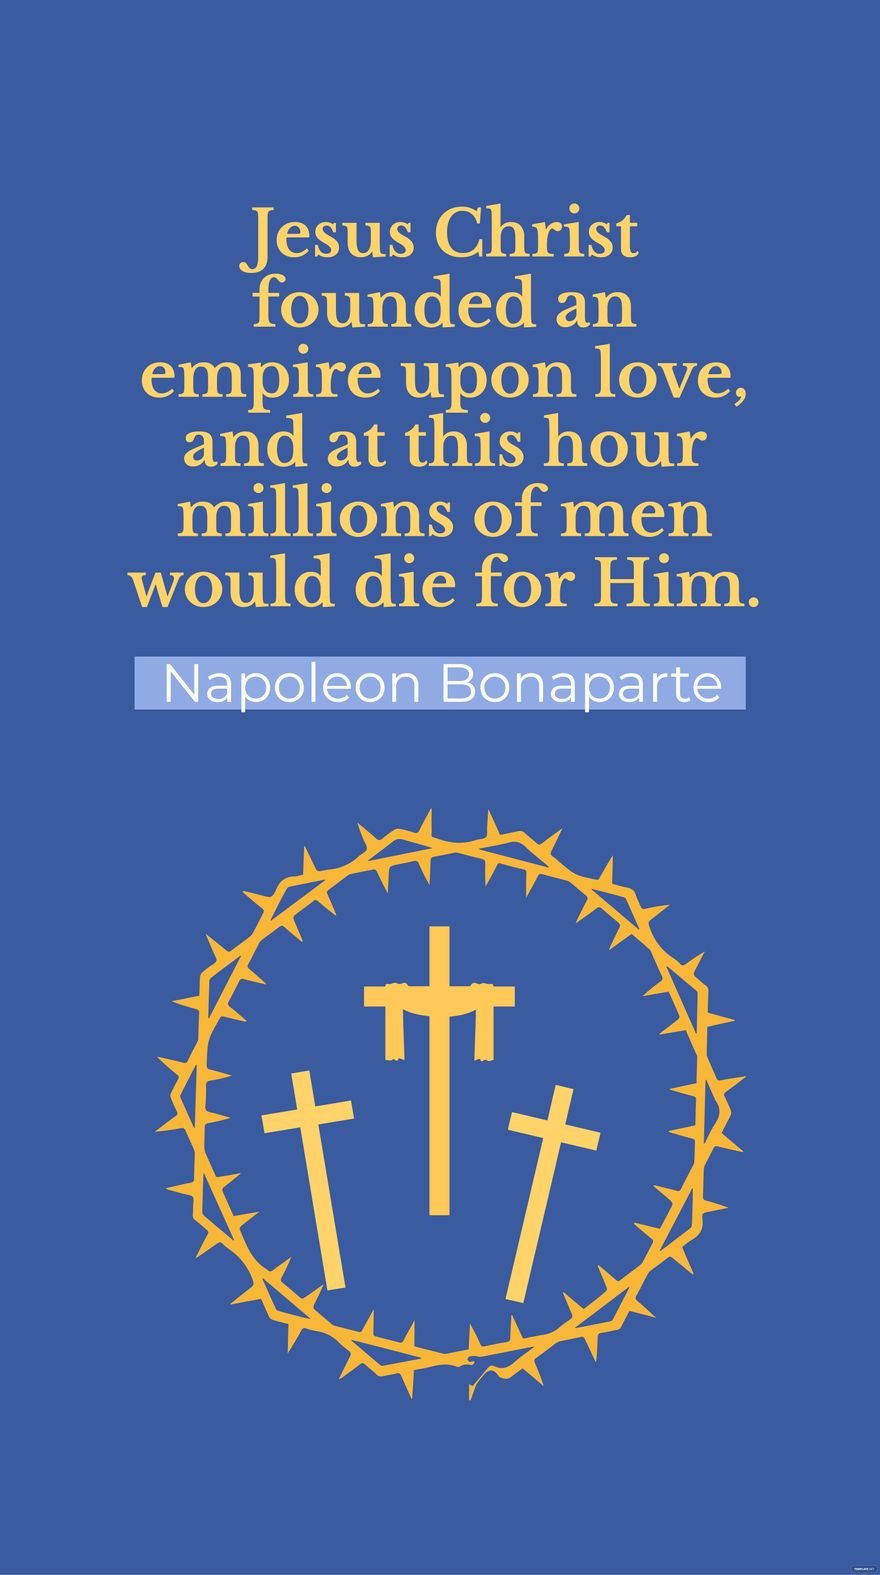 Free Napoleon Bonaparte - Jesus Christ founded an empire upon love, and at this hour millions of men would die for Him.